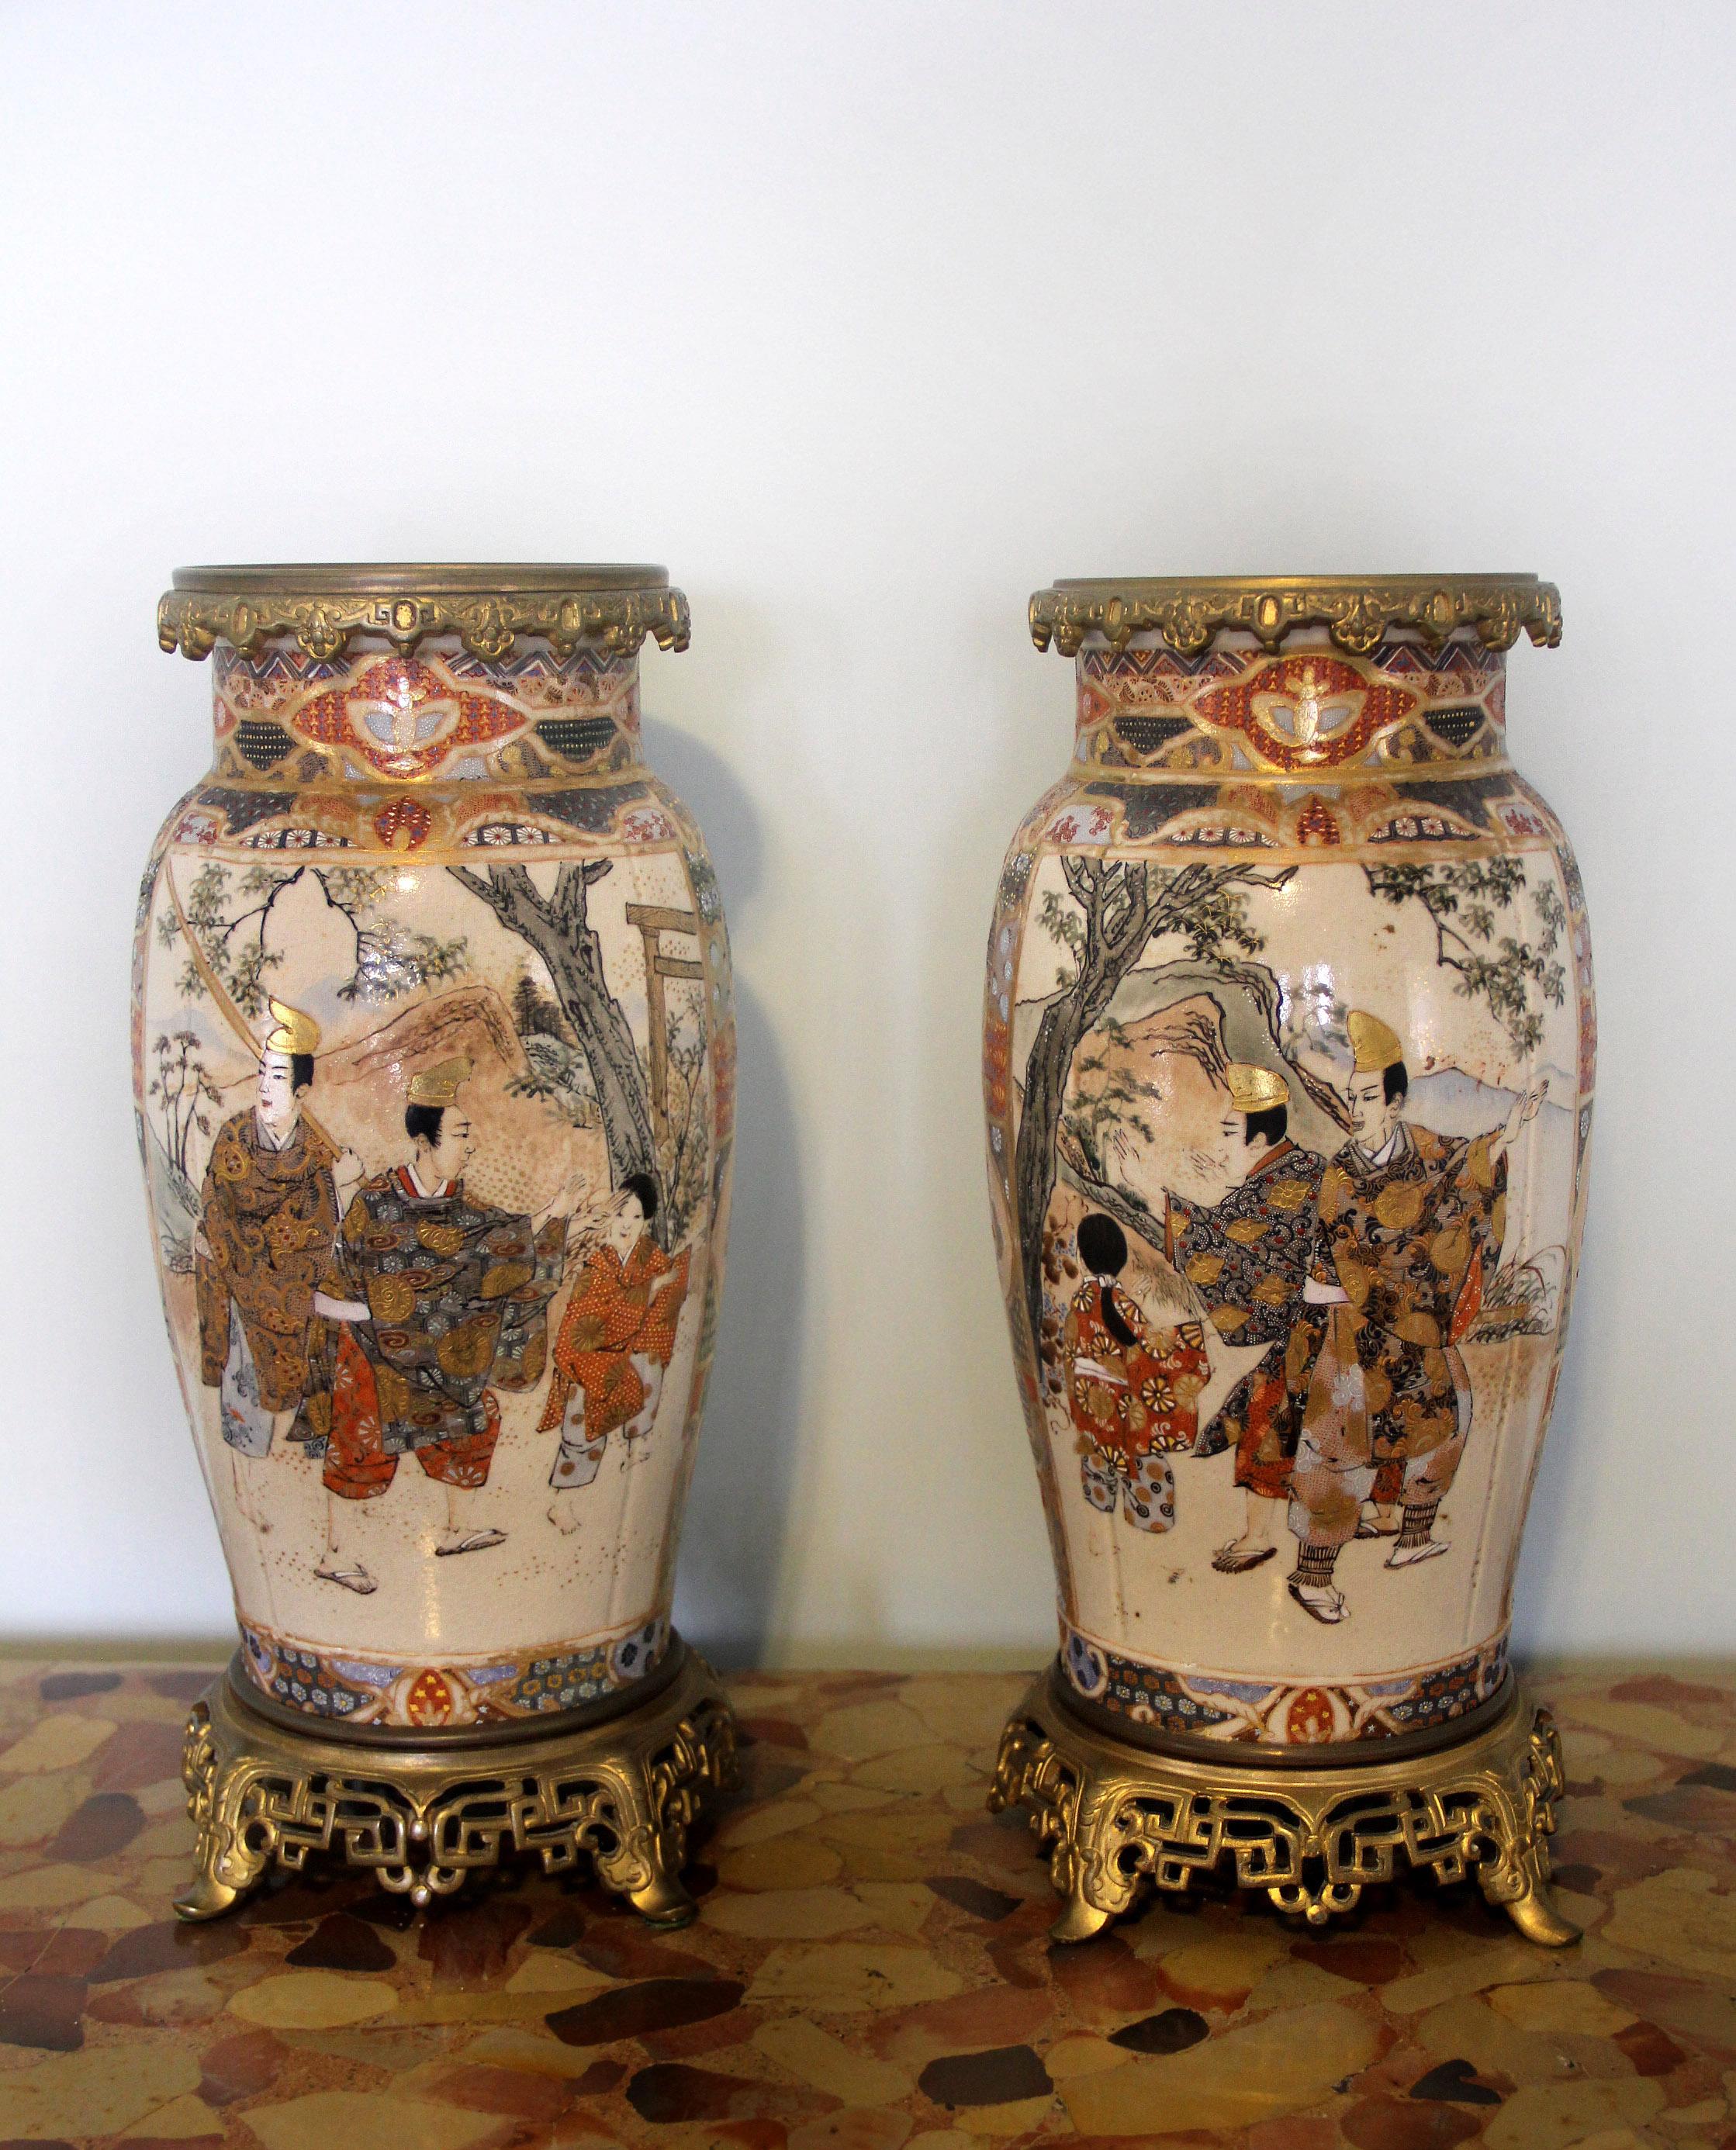 A very fine pair of late 19th century gilt bronze and Japanese Satsuma porcelain vases.

Painted scenes of men, women and children in landscape scenes and at leisure surrounded by very fine raised gold designs, sitting on a nicely designed bronze